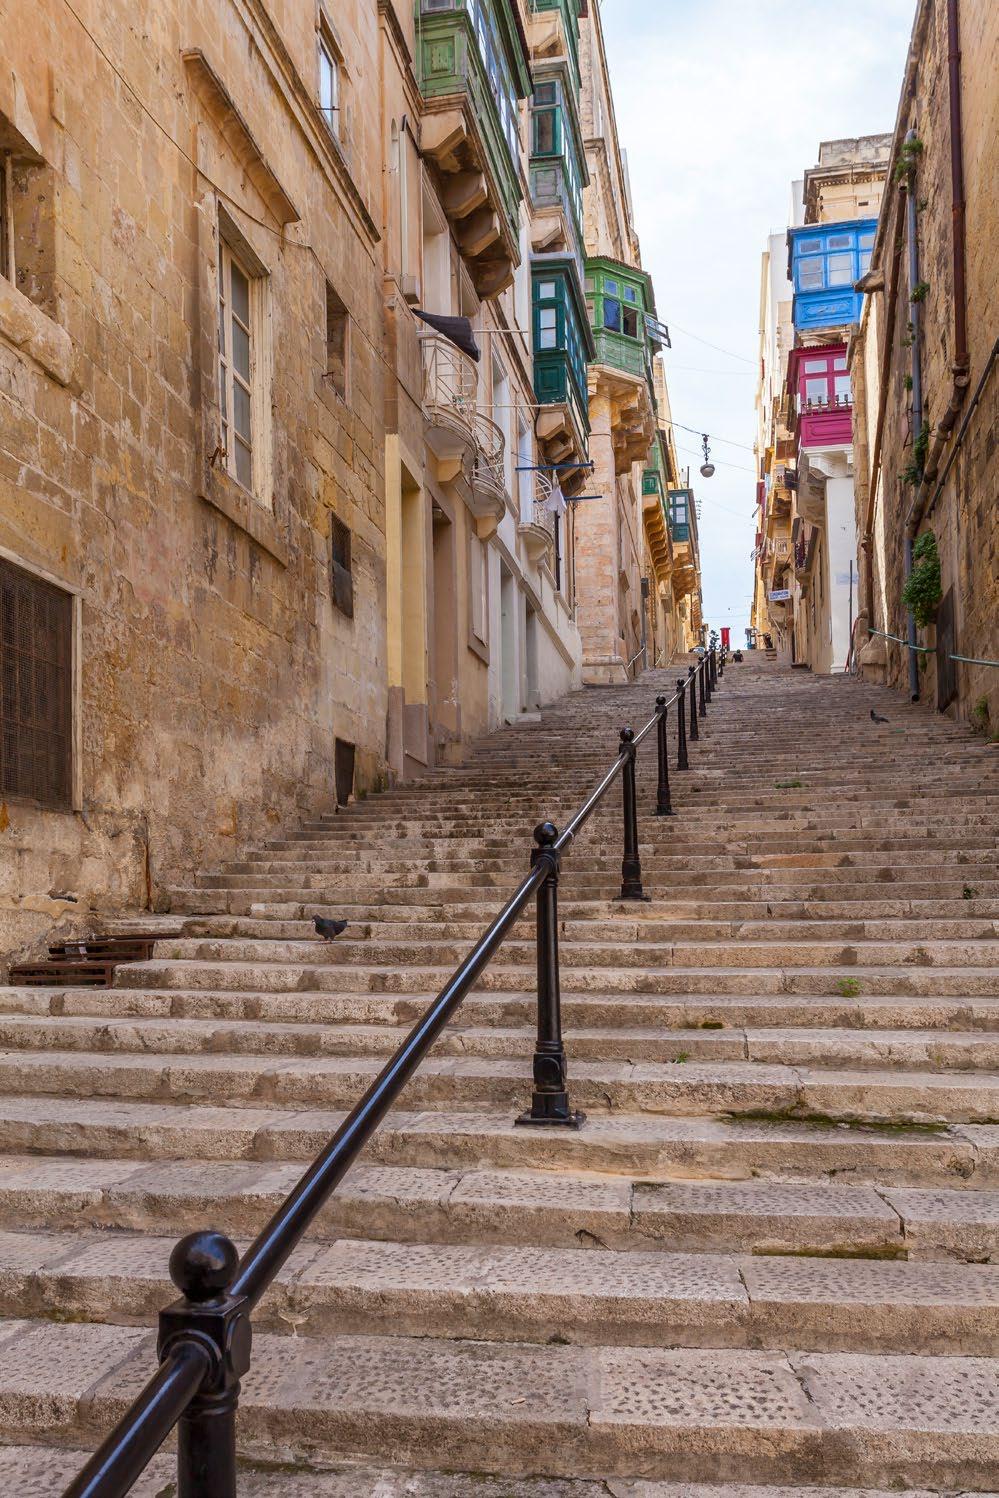 Shallow steps - a common sight in Valletta s streets. intend to visit a number of places, you ll be doing quite a bit of walking.